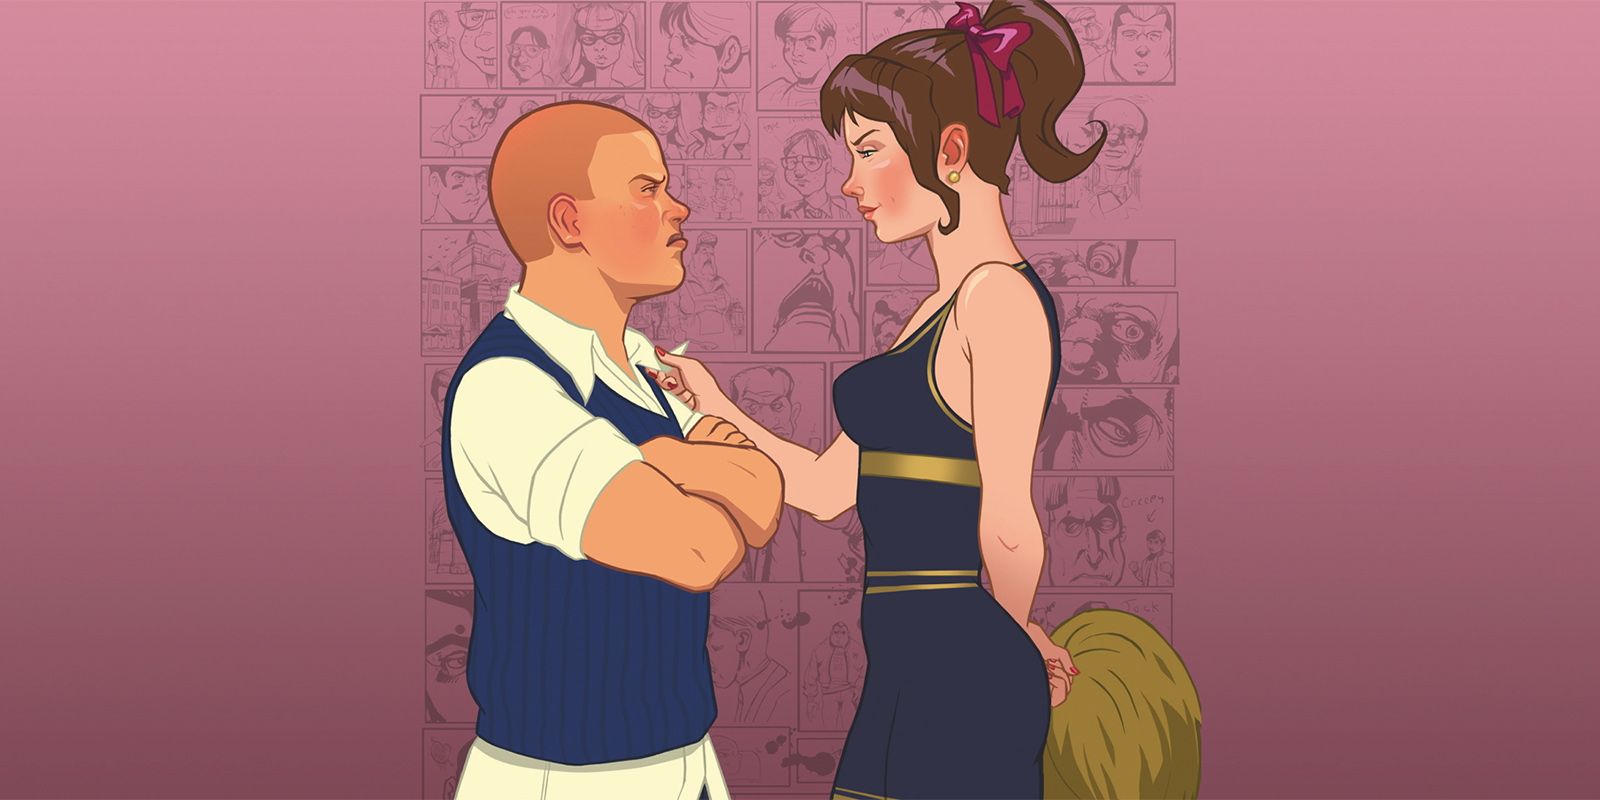 New Report With Rockstar Games Shares More Details On Bully 2 - mxdwn Games